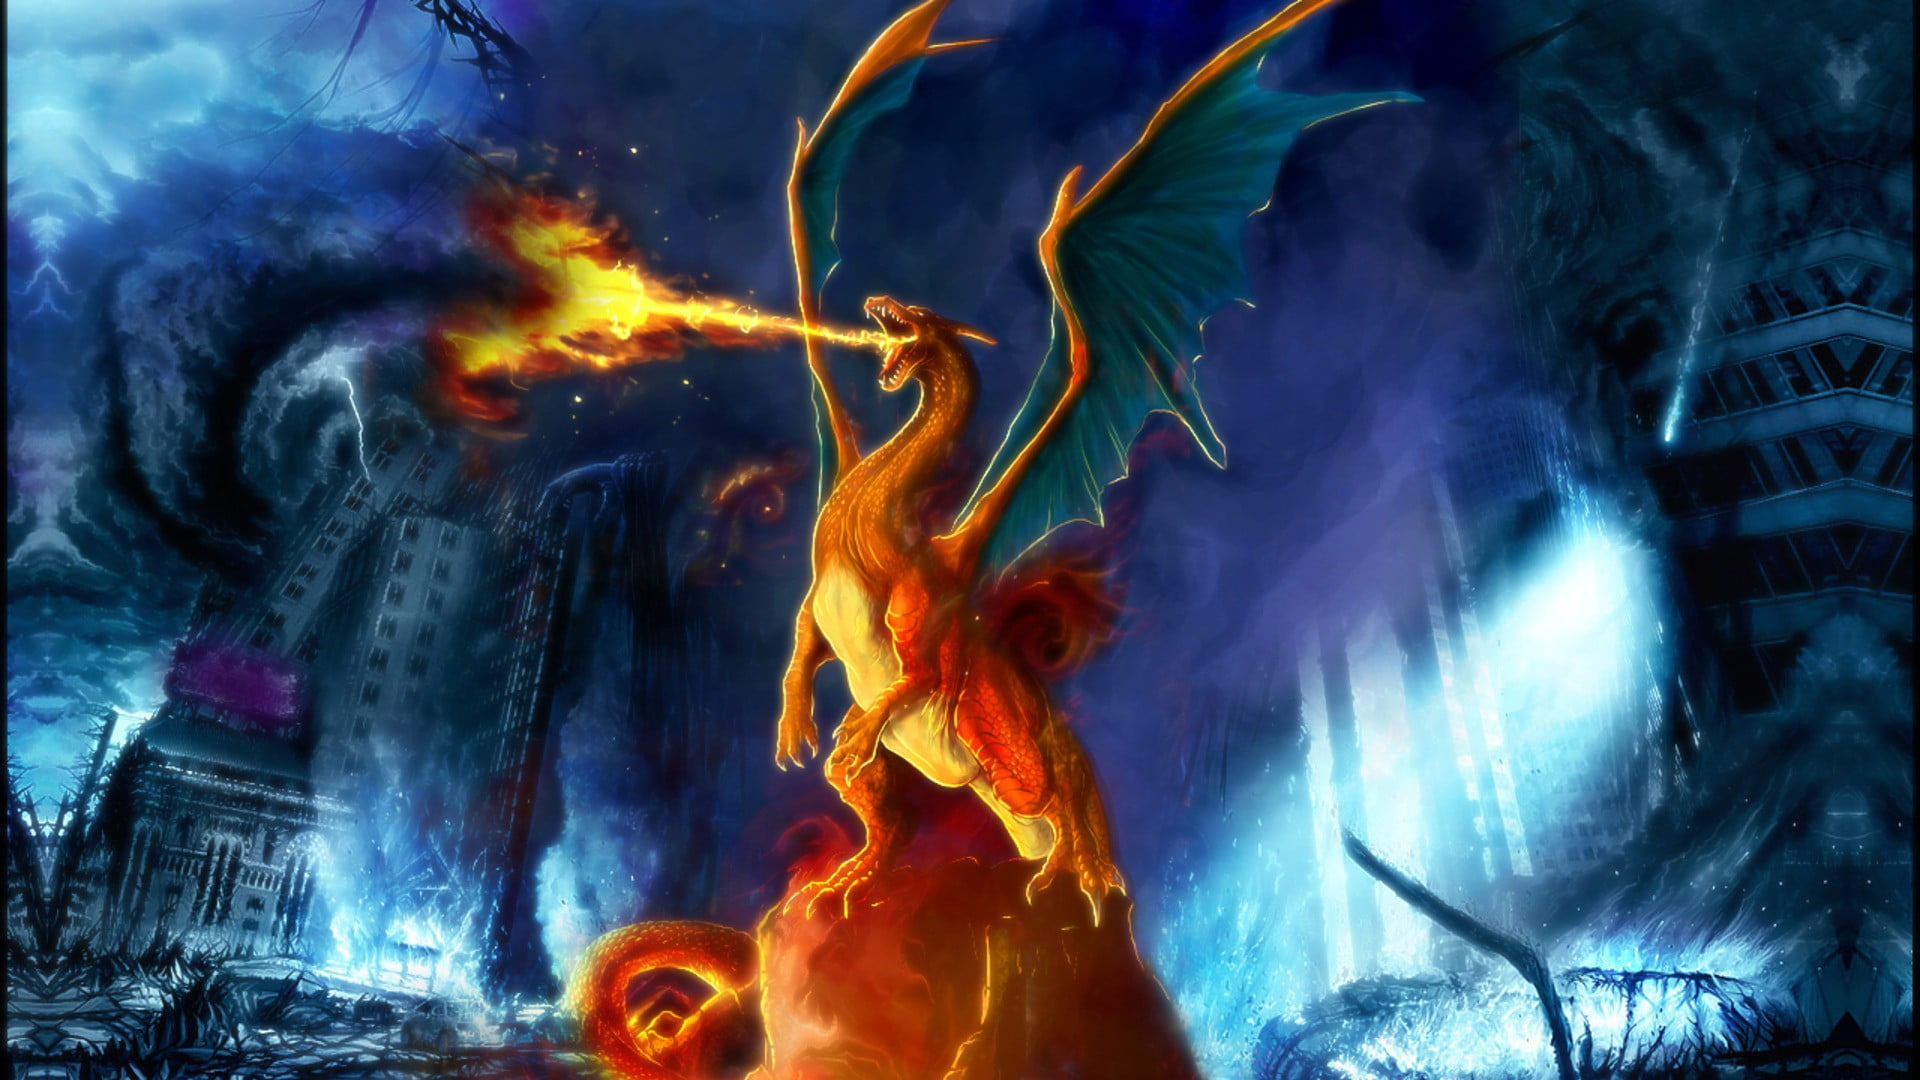 Download wallpapers Charizard, pokemon, orange stone background, creative  art, pokemon characters, Charizard pokemon for desktop with resolution  2880x1800. High Quality HD pictures wallpapers